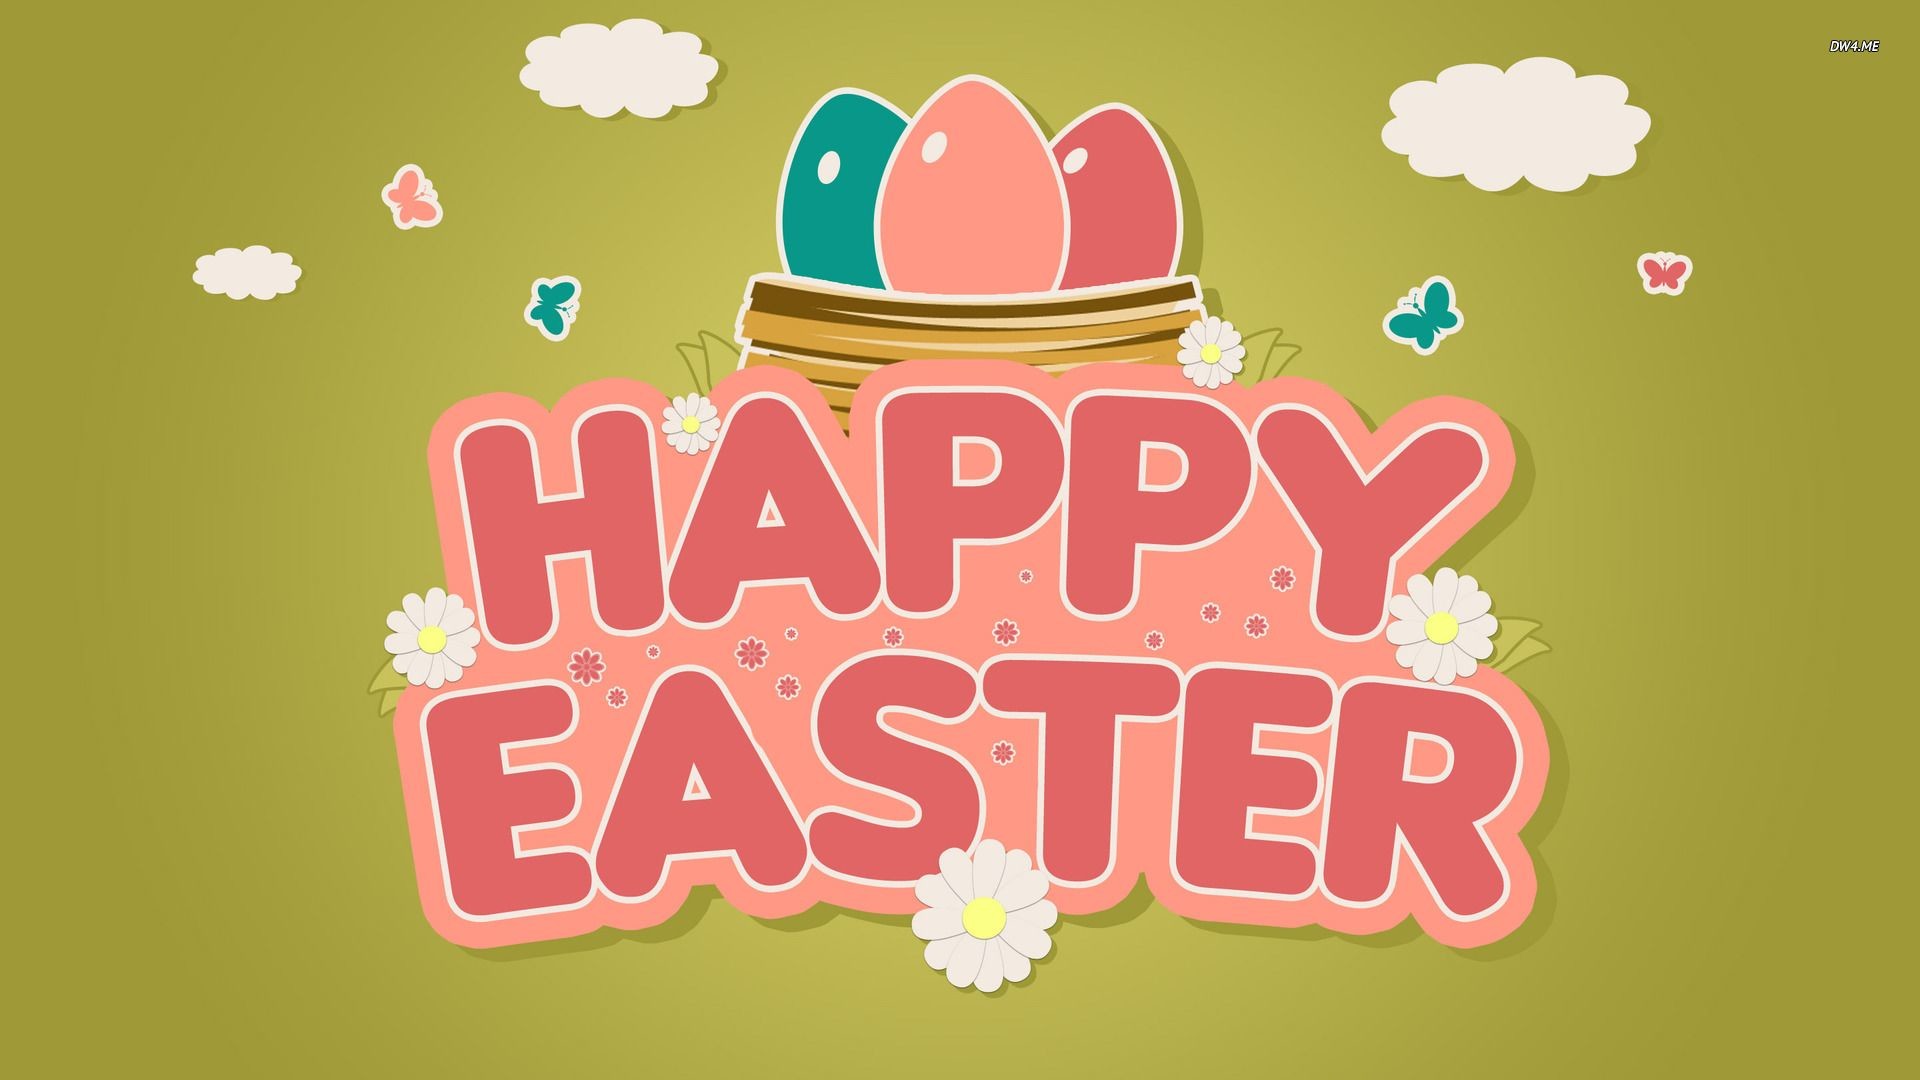 1920x1080 Image Happy Easter